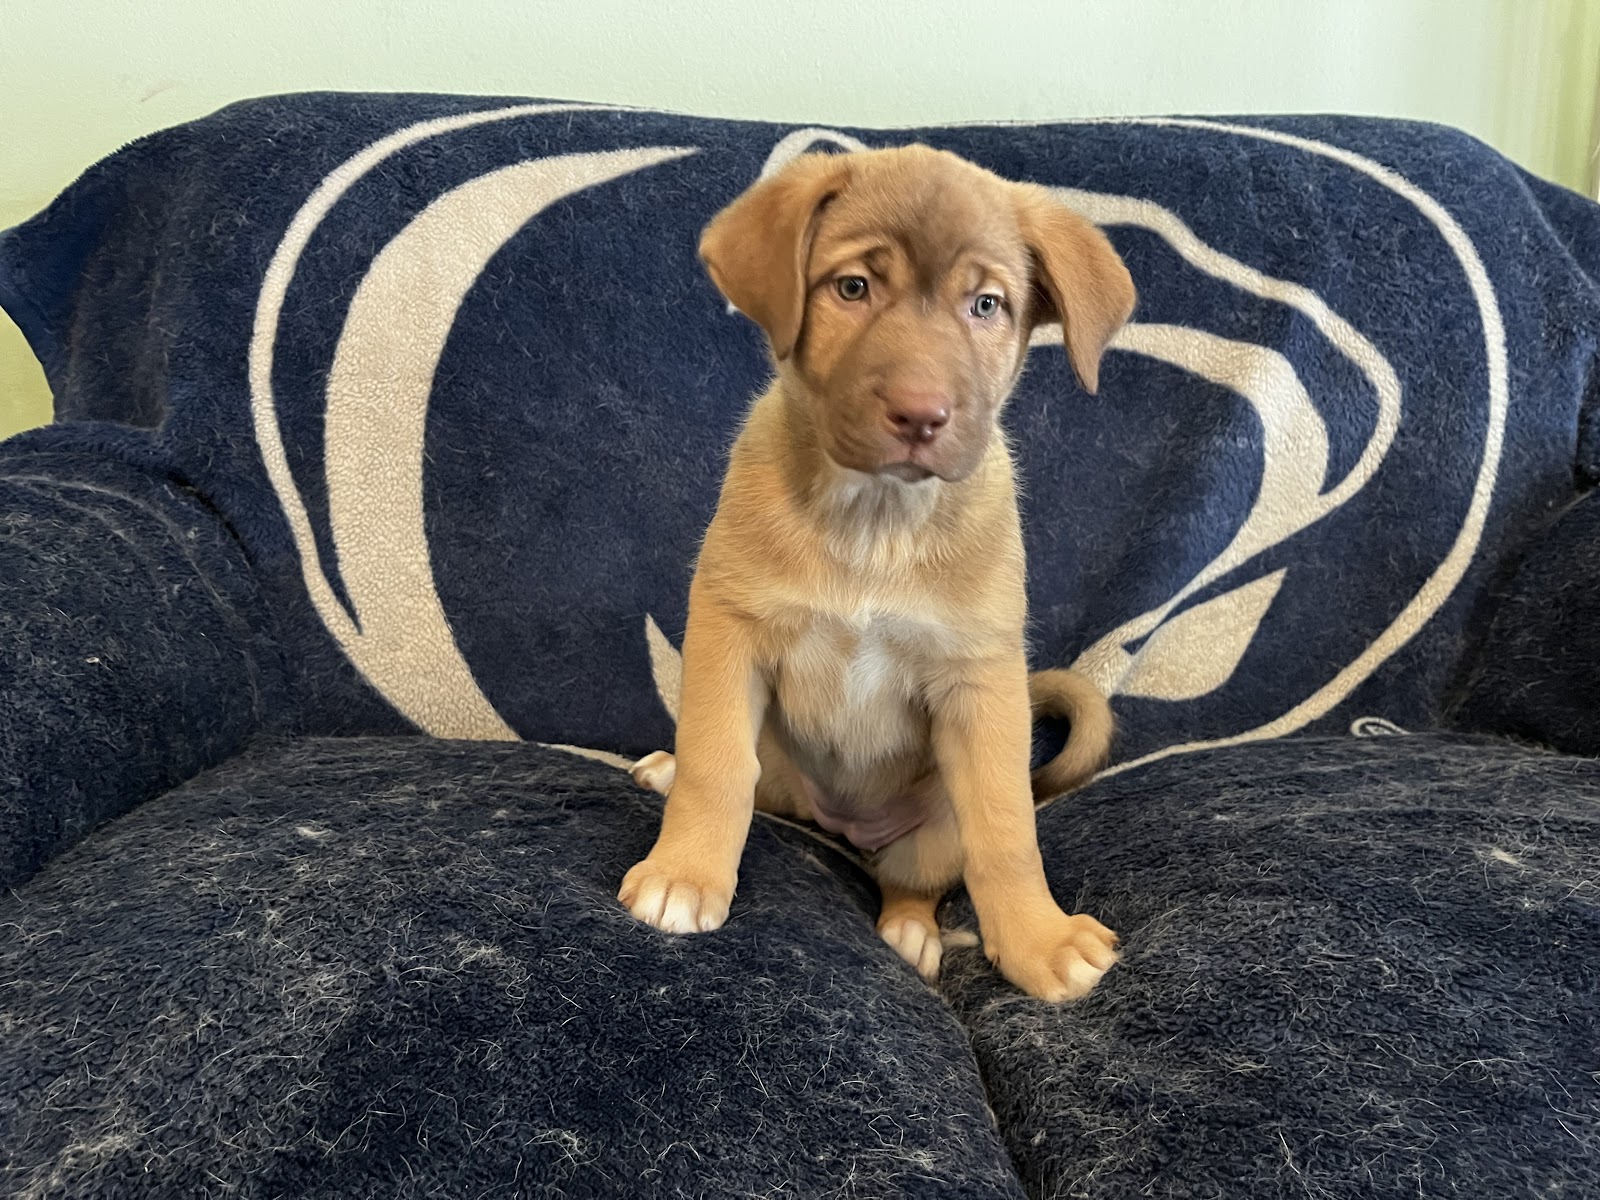 8 week old Akita mix puppy, mostly brown-tan with light tan-white chest and belly area is sitting on a couch with blue and white PSU blanket